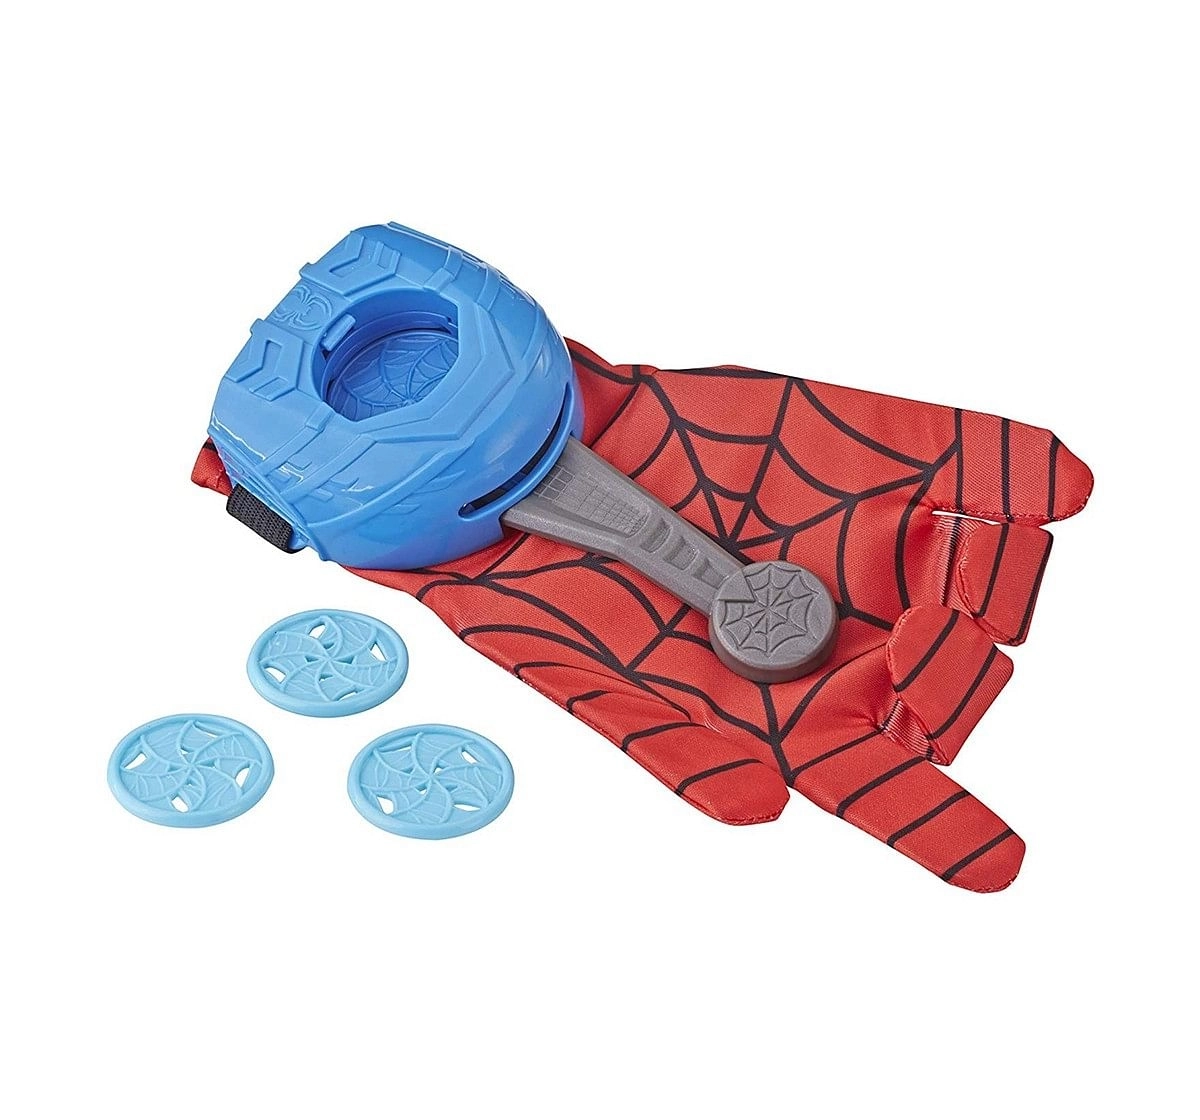 Marvel Spider-Man Web Launcher Glove Action Figure Play Sets for Kids age 5Y+ 